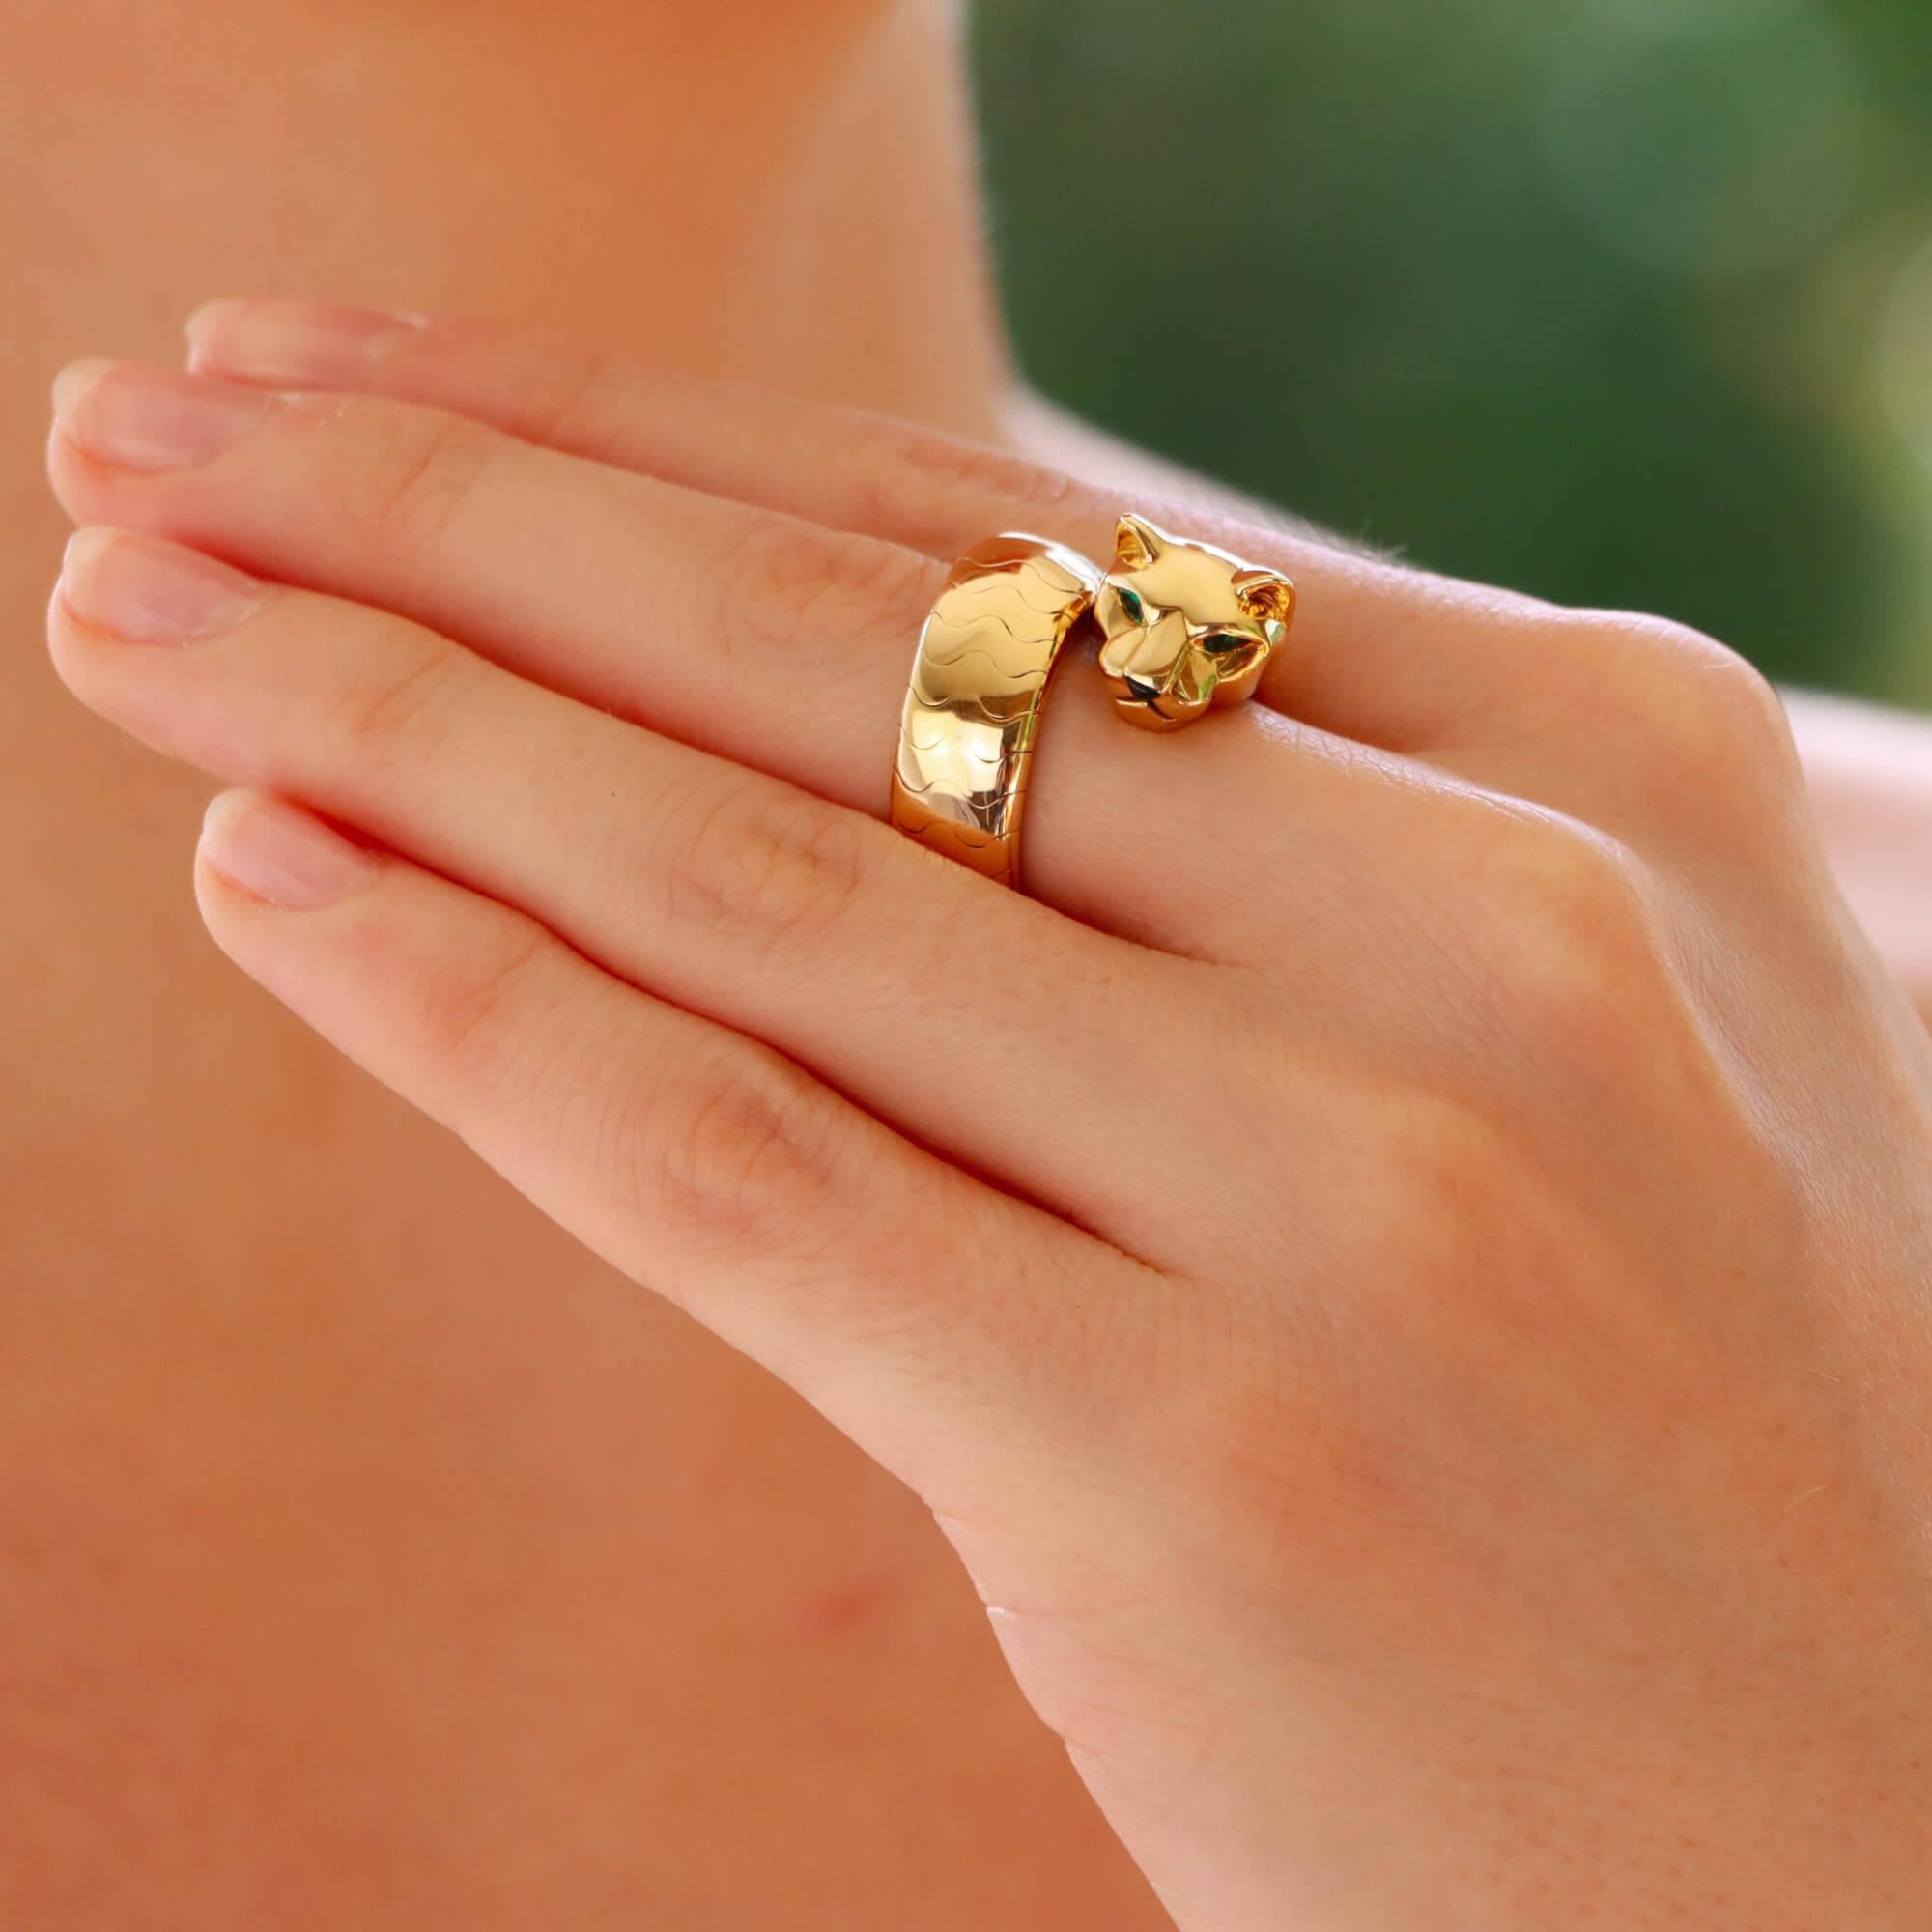 A stylish vintage Cartier Lakarda panther ring set in 18k yellow gold.

In the brand’s iconic panther motif, this ring depicts a panther head, which flows through to a slightly articulated thick spring band. The panther has been beautifully crafted